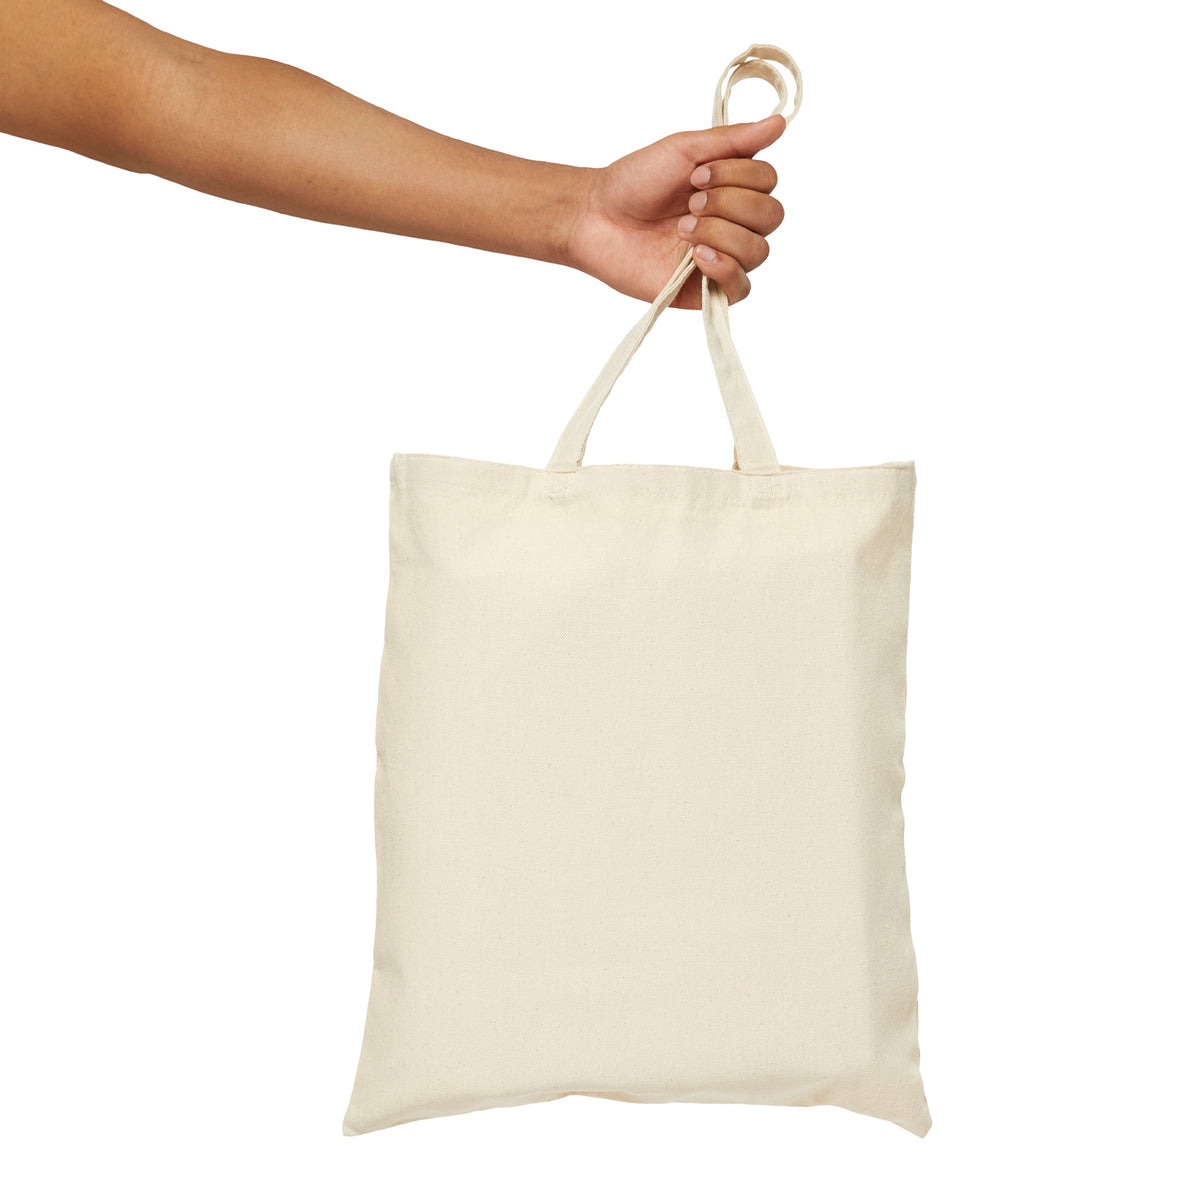 Pilates Is Better Canvas Tote